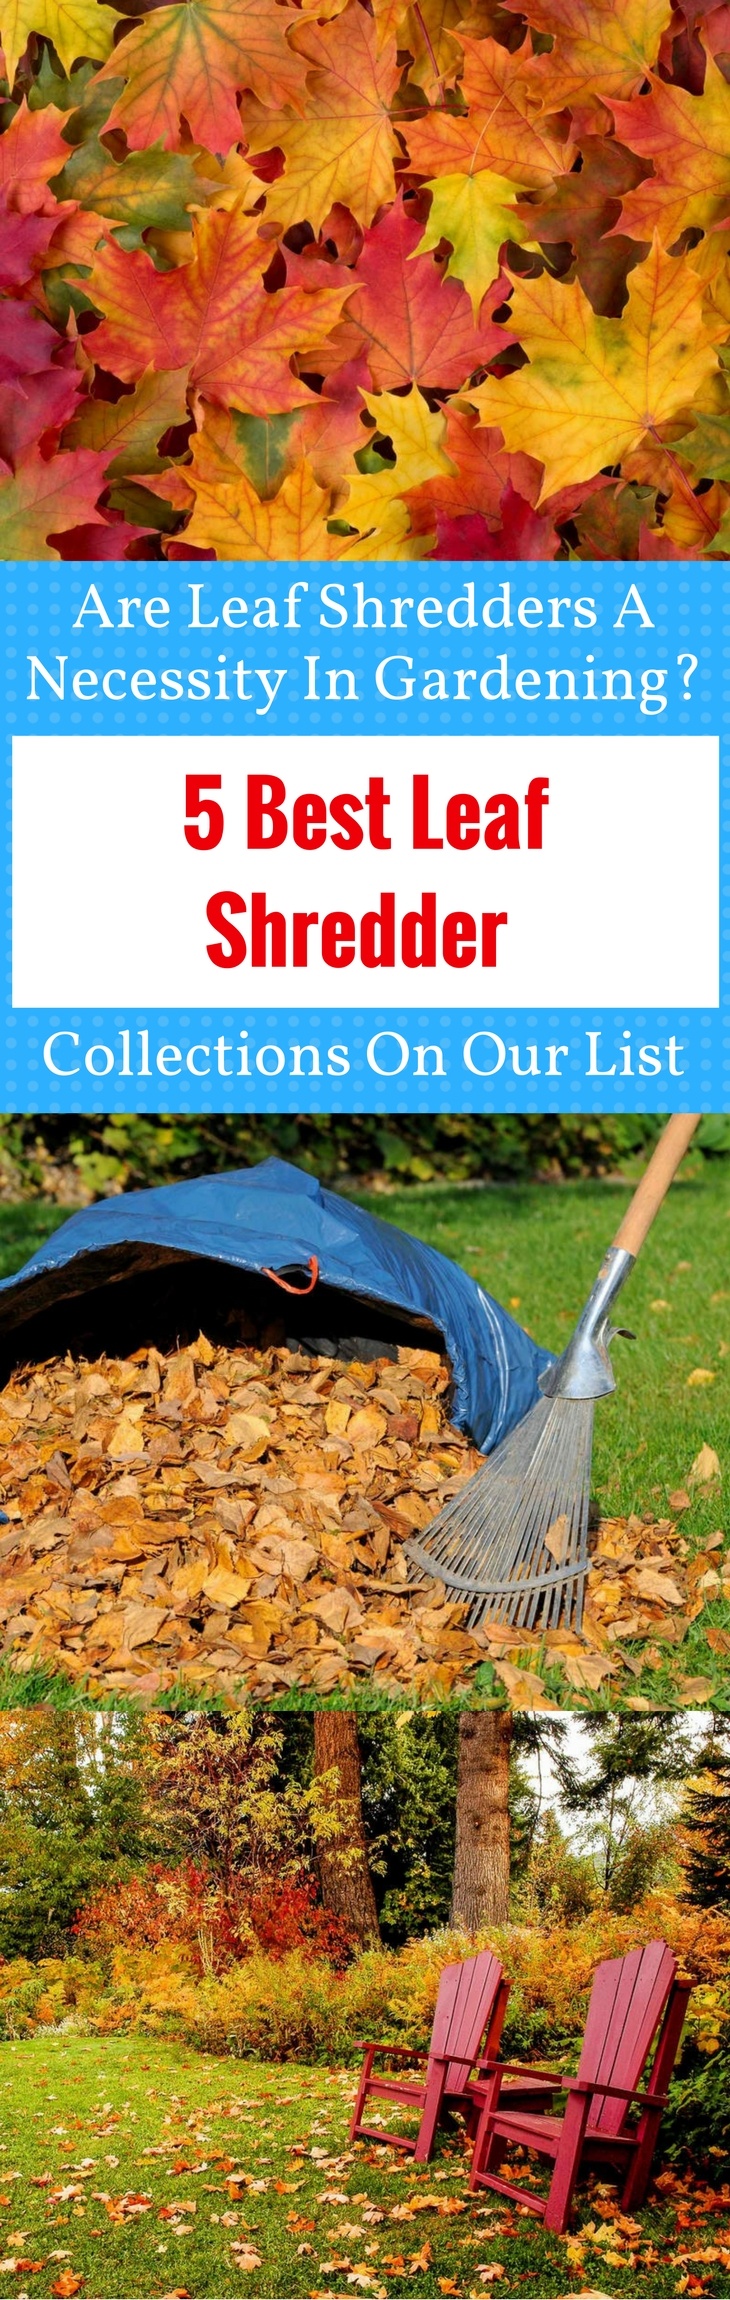 5 Best Leaf Shredder Collections on Our List pin it